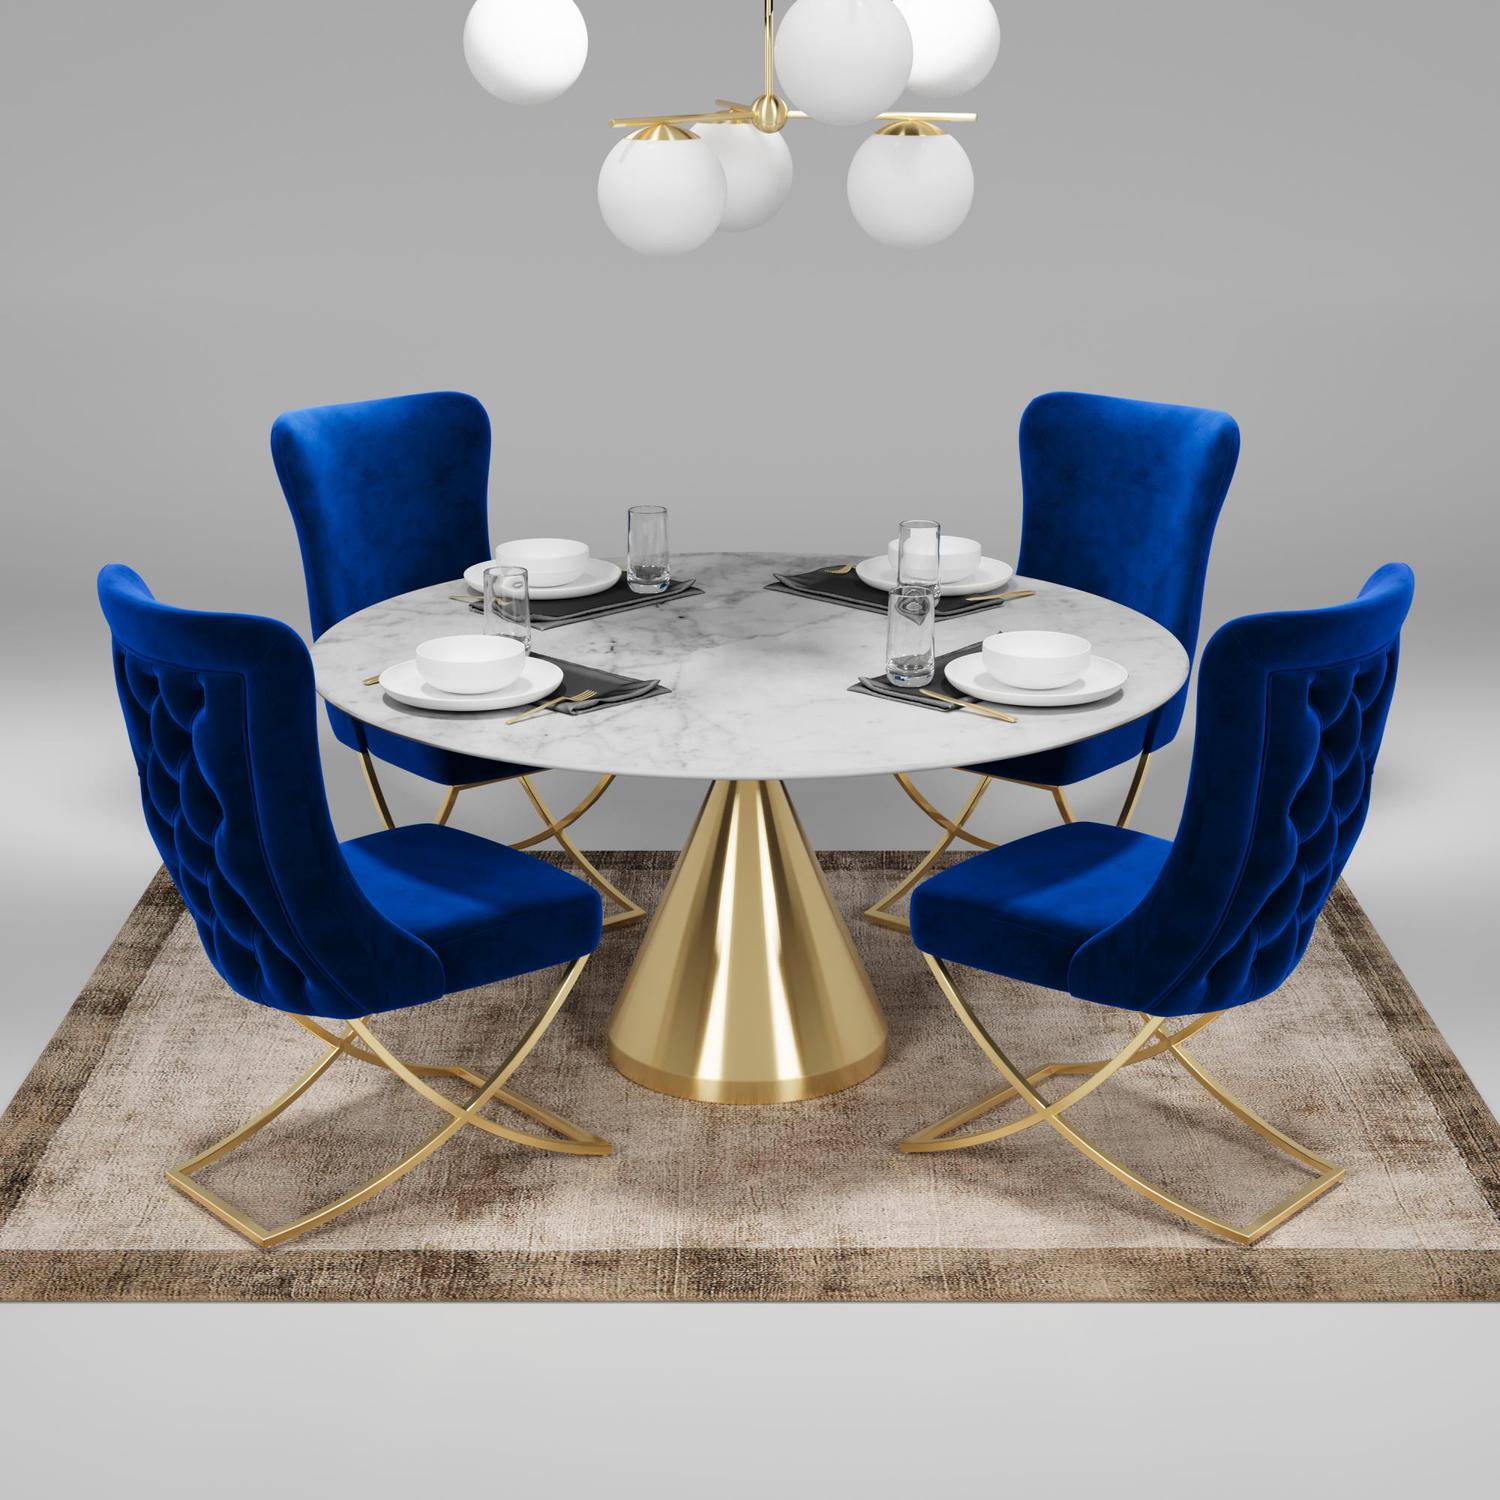 Sultan Collection Wing Back, Modern design, upholstered dining chair in Imperial Blue with Gold Metal legs in a dining room with set of four chairs around a round table.